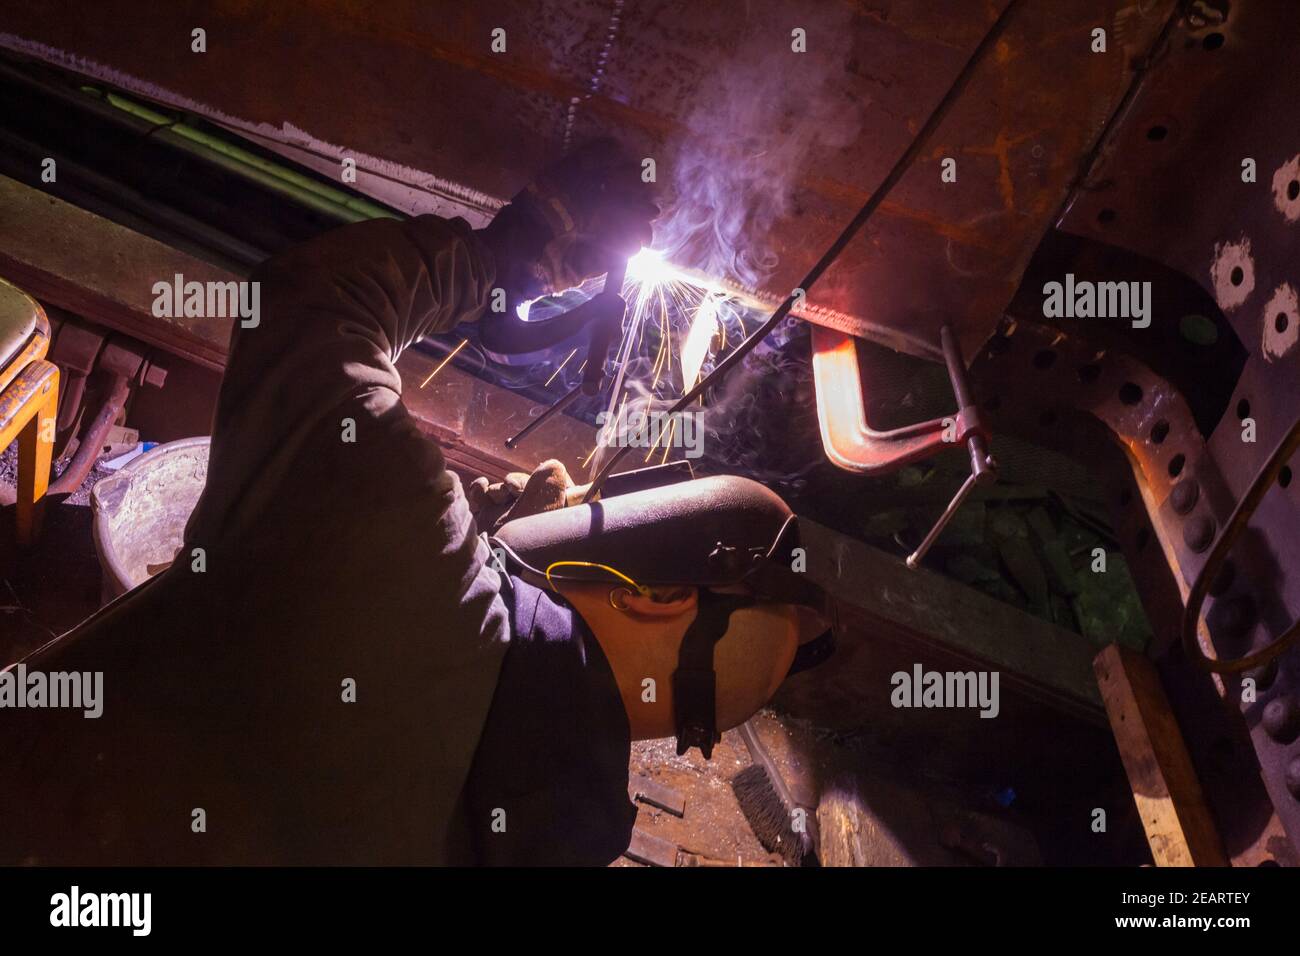 A welder working on the overhaul of an old steam locomotive in the workshop of the Keighley and Worth Valley railway at Haworth Stock Photo